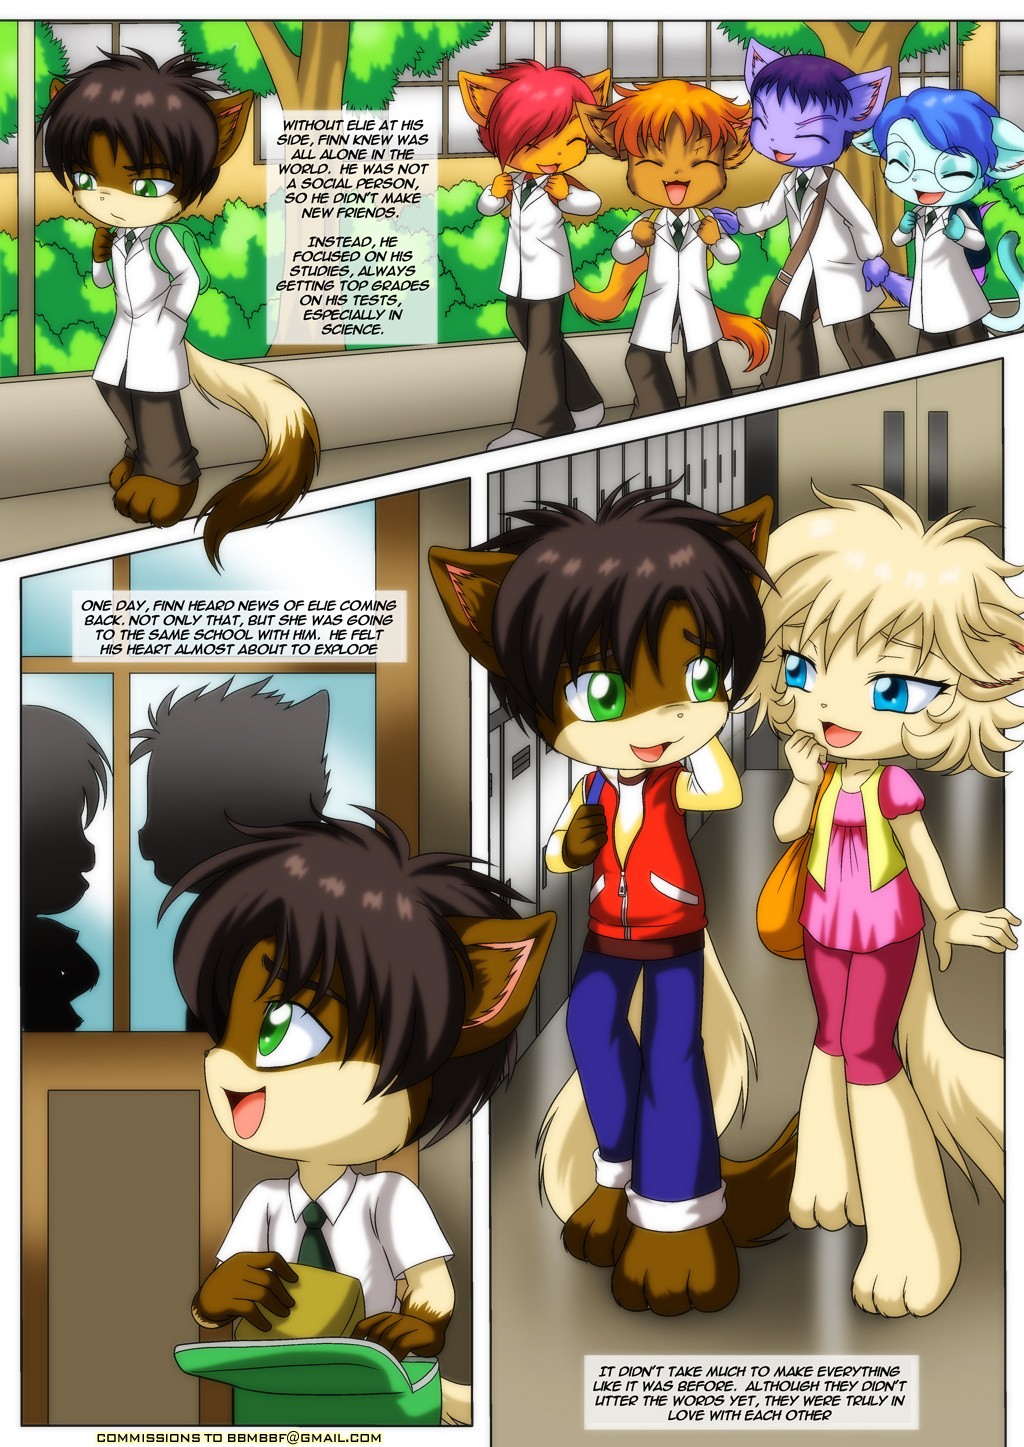 Little Tails 6: Missing The Light of The Day porn comic picture 7